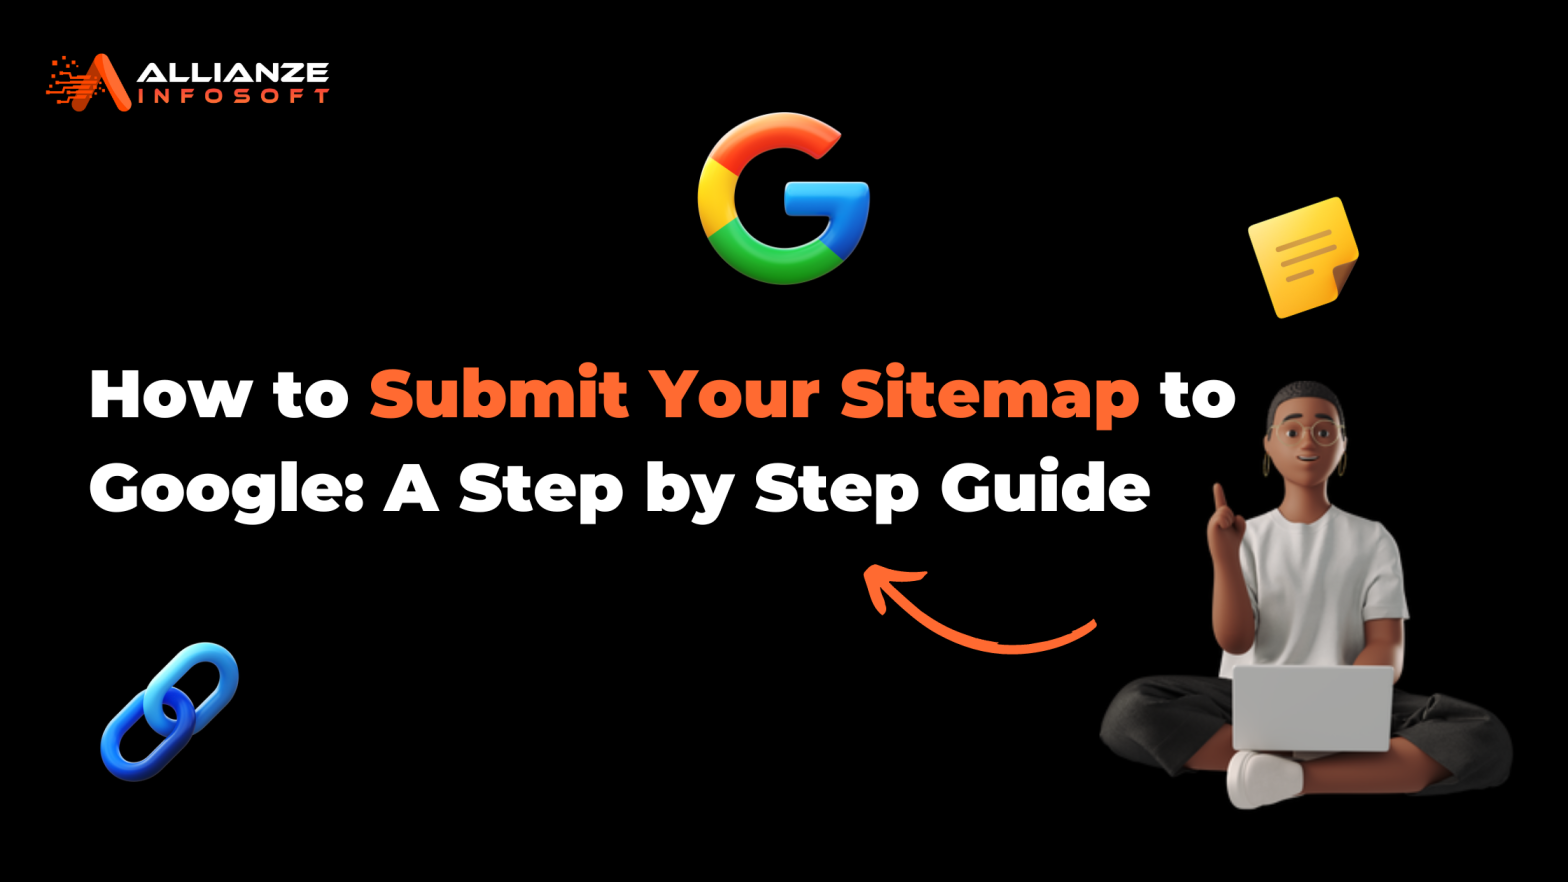 how-to-submit-your-sitemap-to-google-step-by-step-guide-featured-image